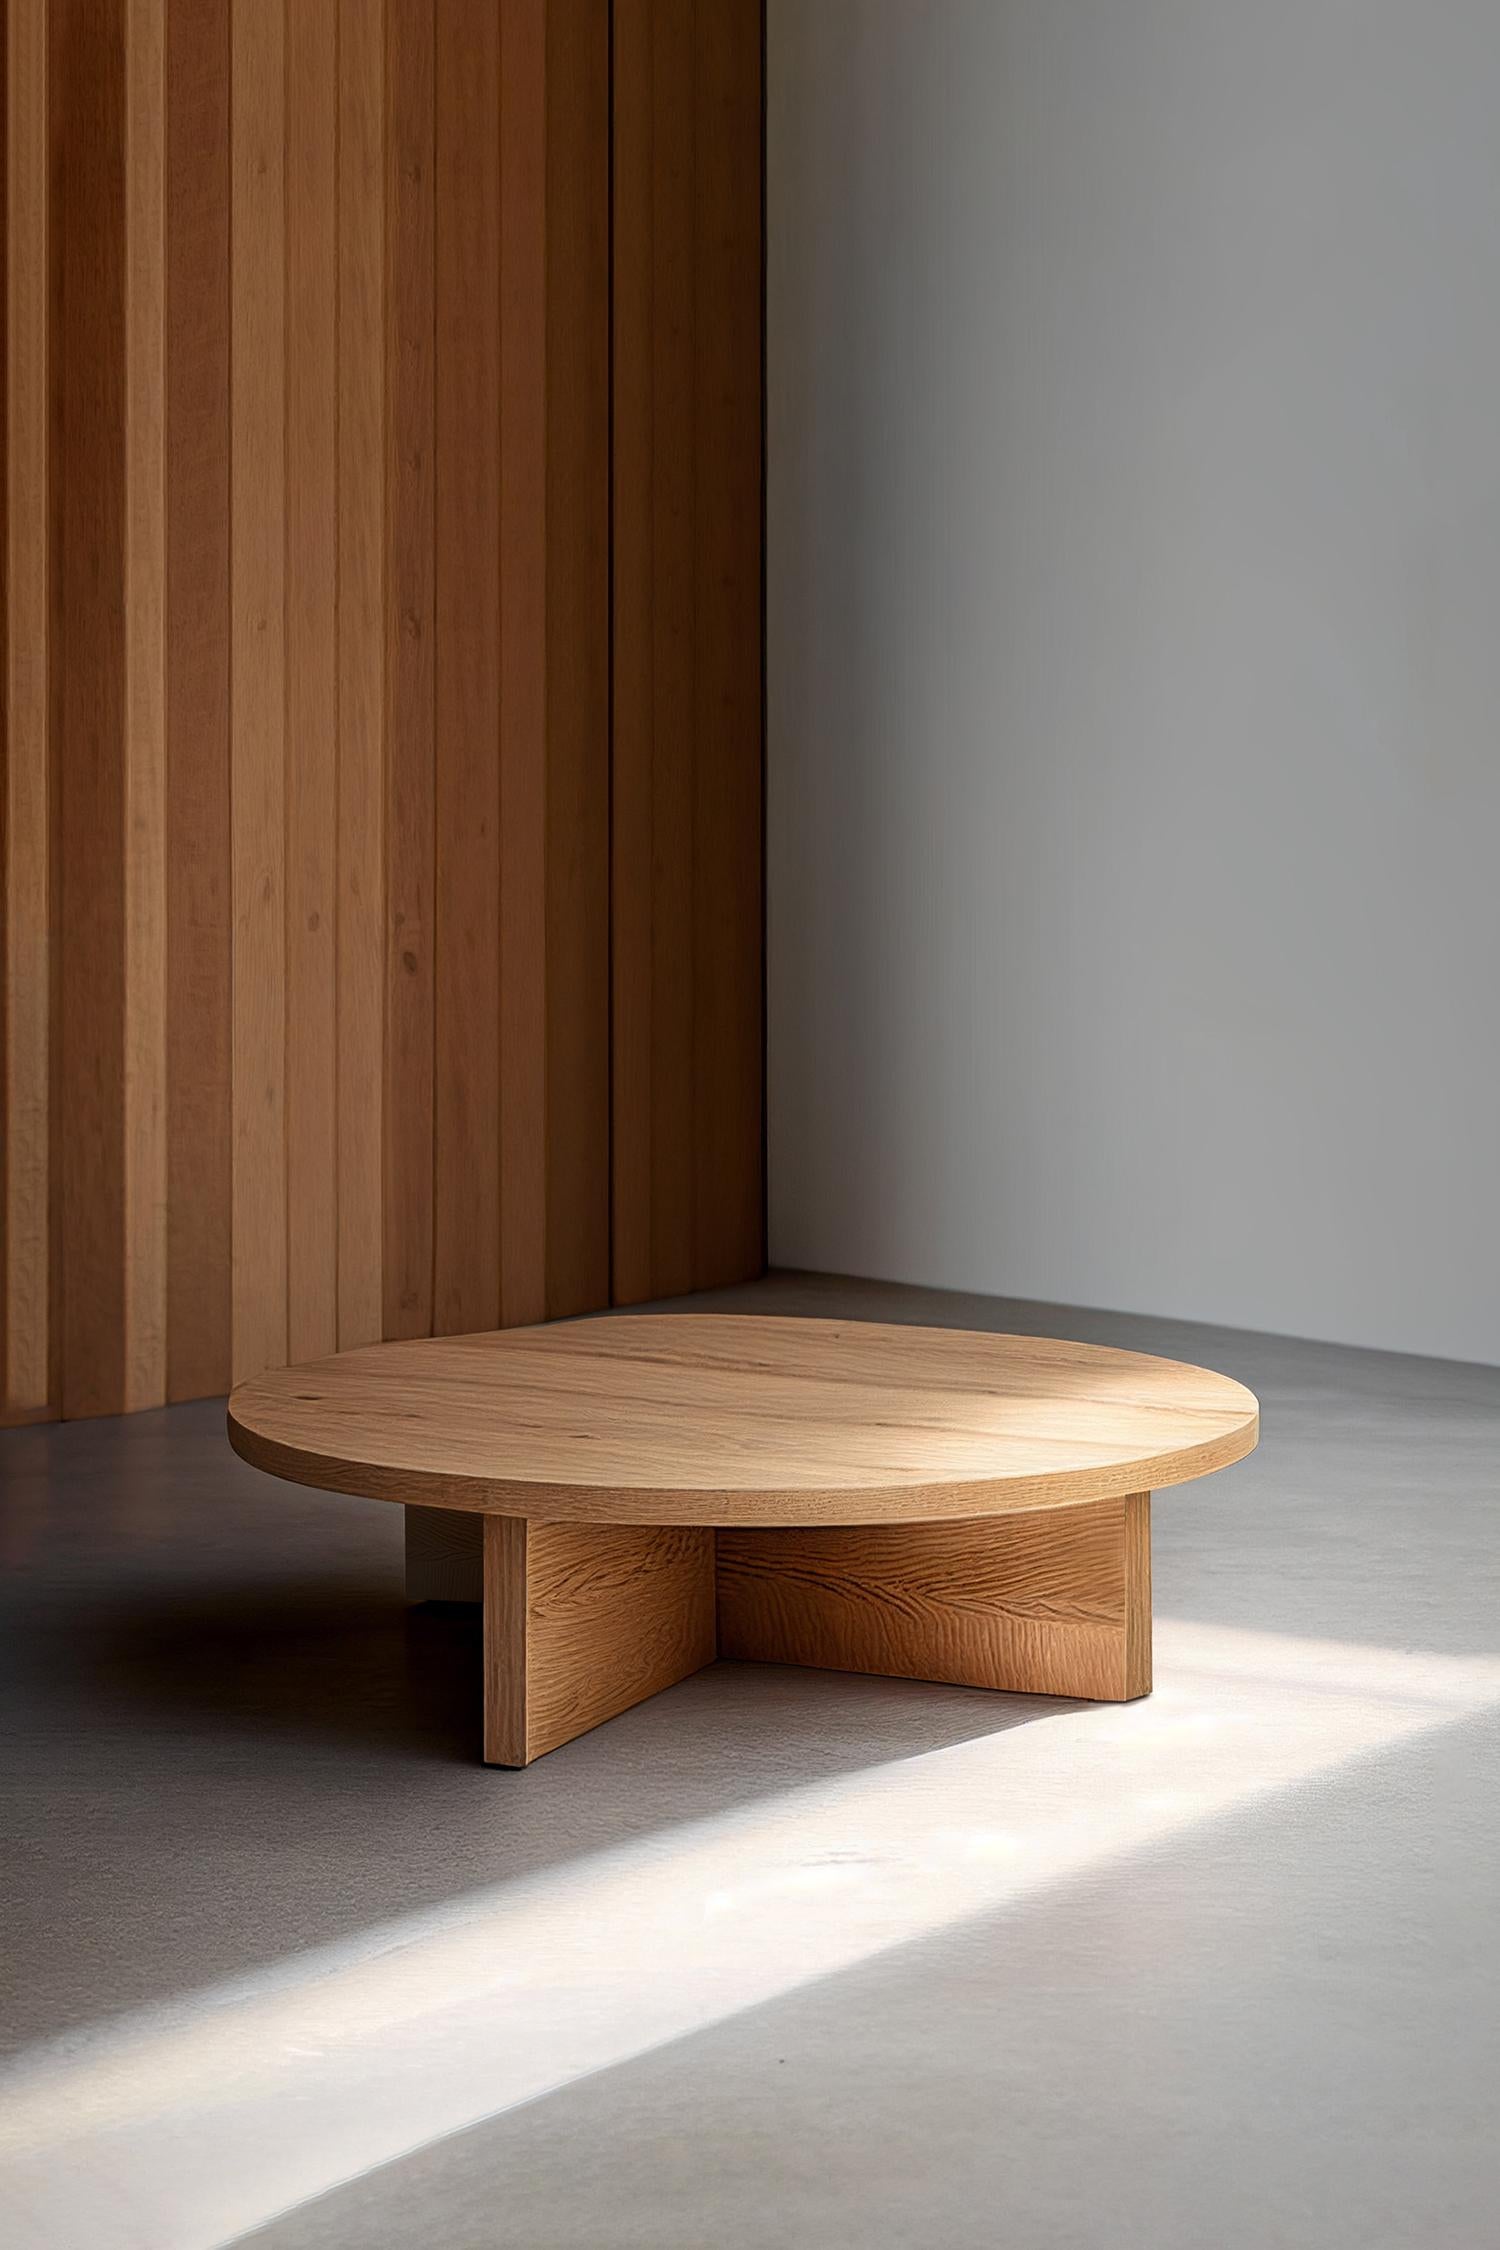 Round coffee table with cross legs made of solid oak.
Product made to order; some variances may apply to the final piece.


——

NONO is a Mexican design brand with more than 10 years of experience dedicated to the production of interior furnishings,